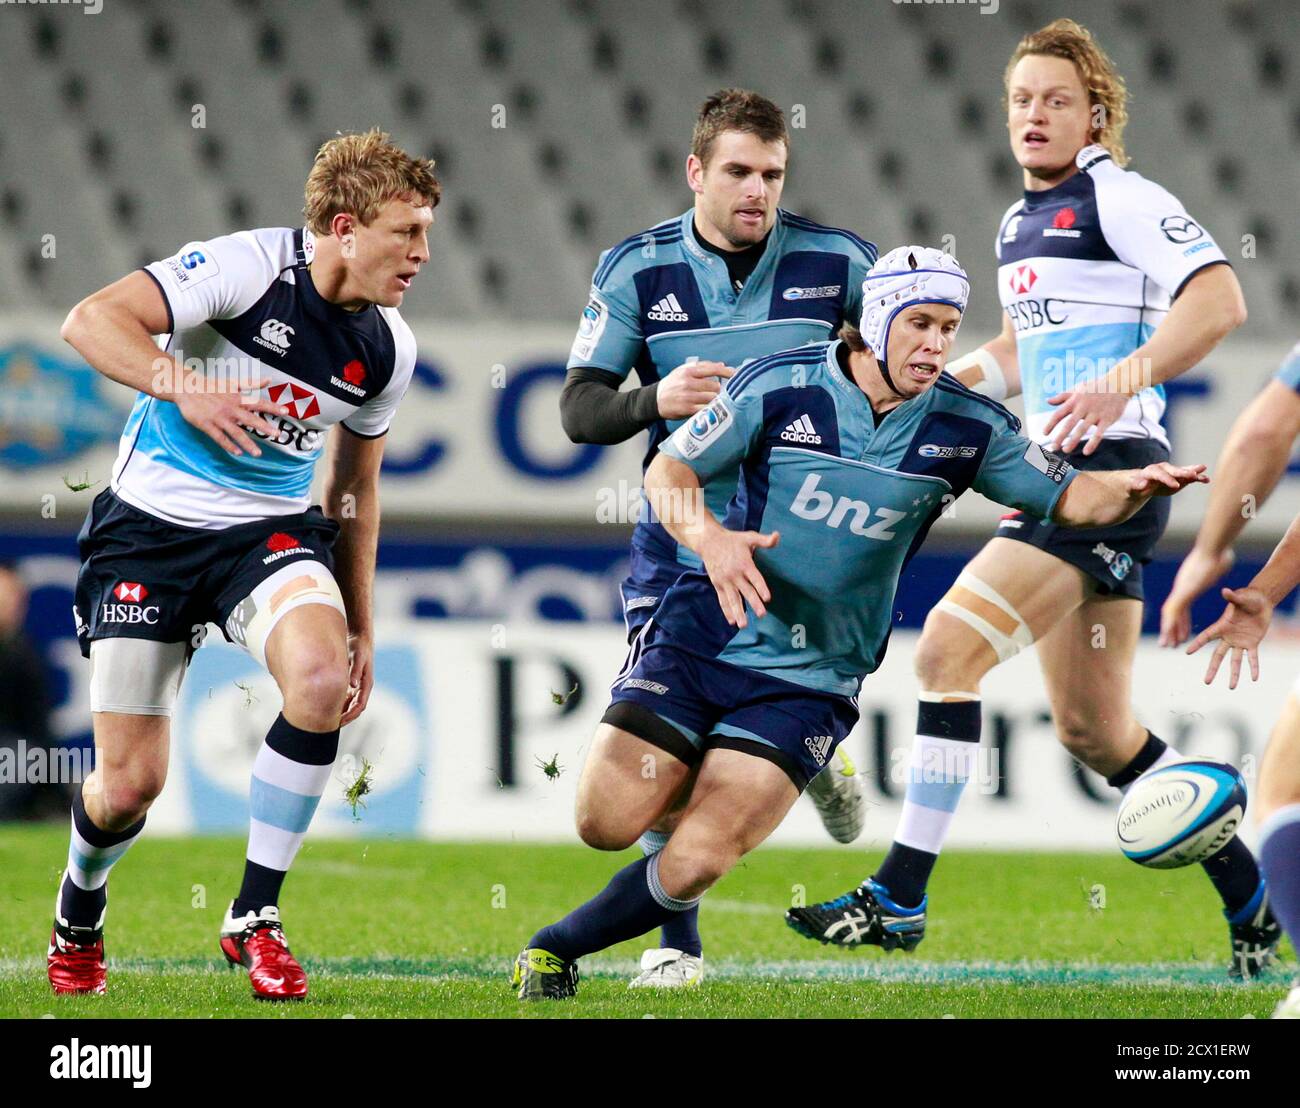 Lachie Munro (in headgear) of New Zealand's Auckland Blues looks to gather  the loose ball, watched by Lachie Turner (L) of Australia's New South Wales  Waratahs, during their Super 15 rugby match